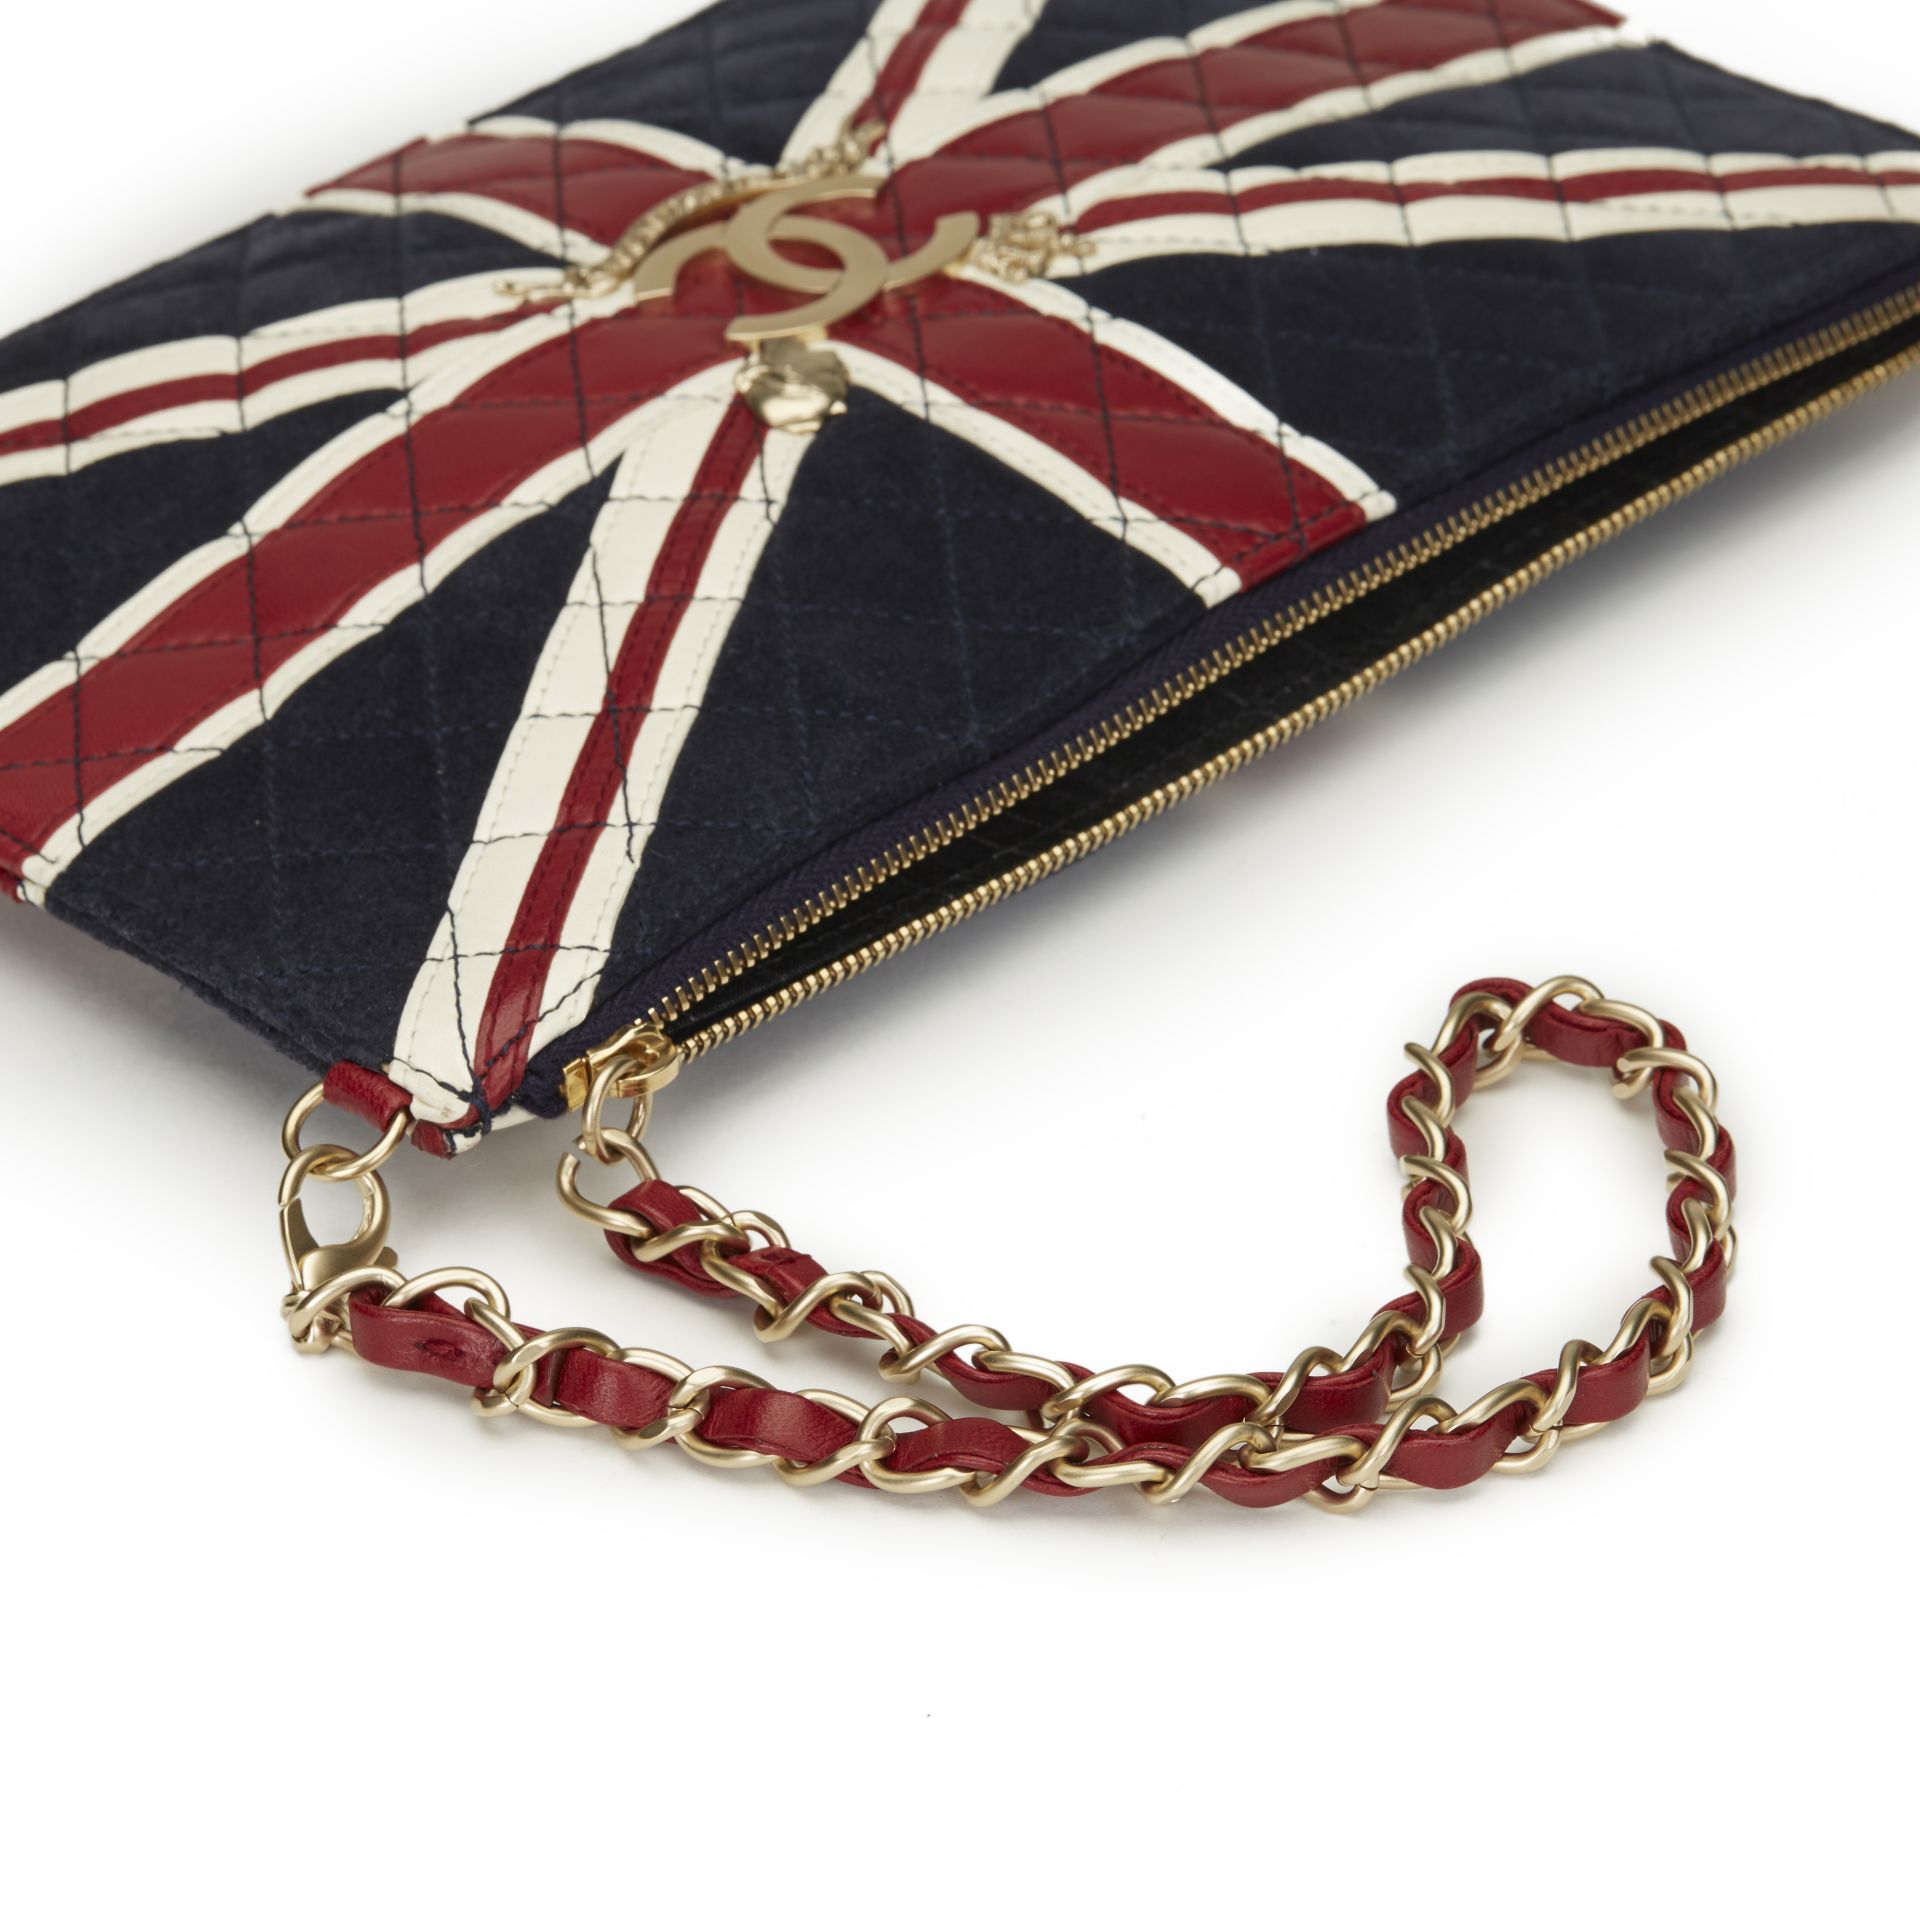 Chanel Union Jack Pouch - Image 7 of 10